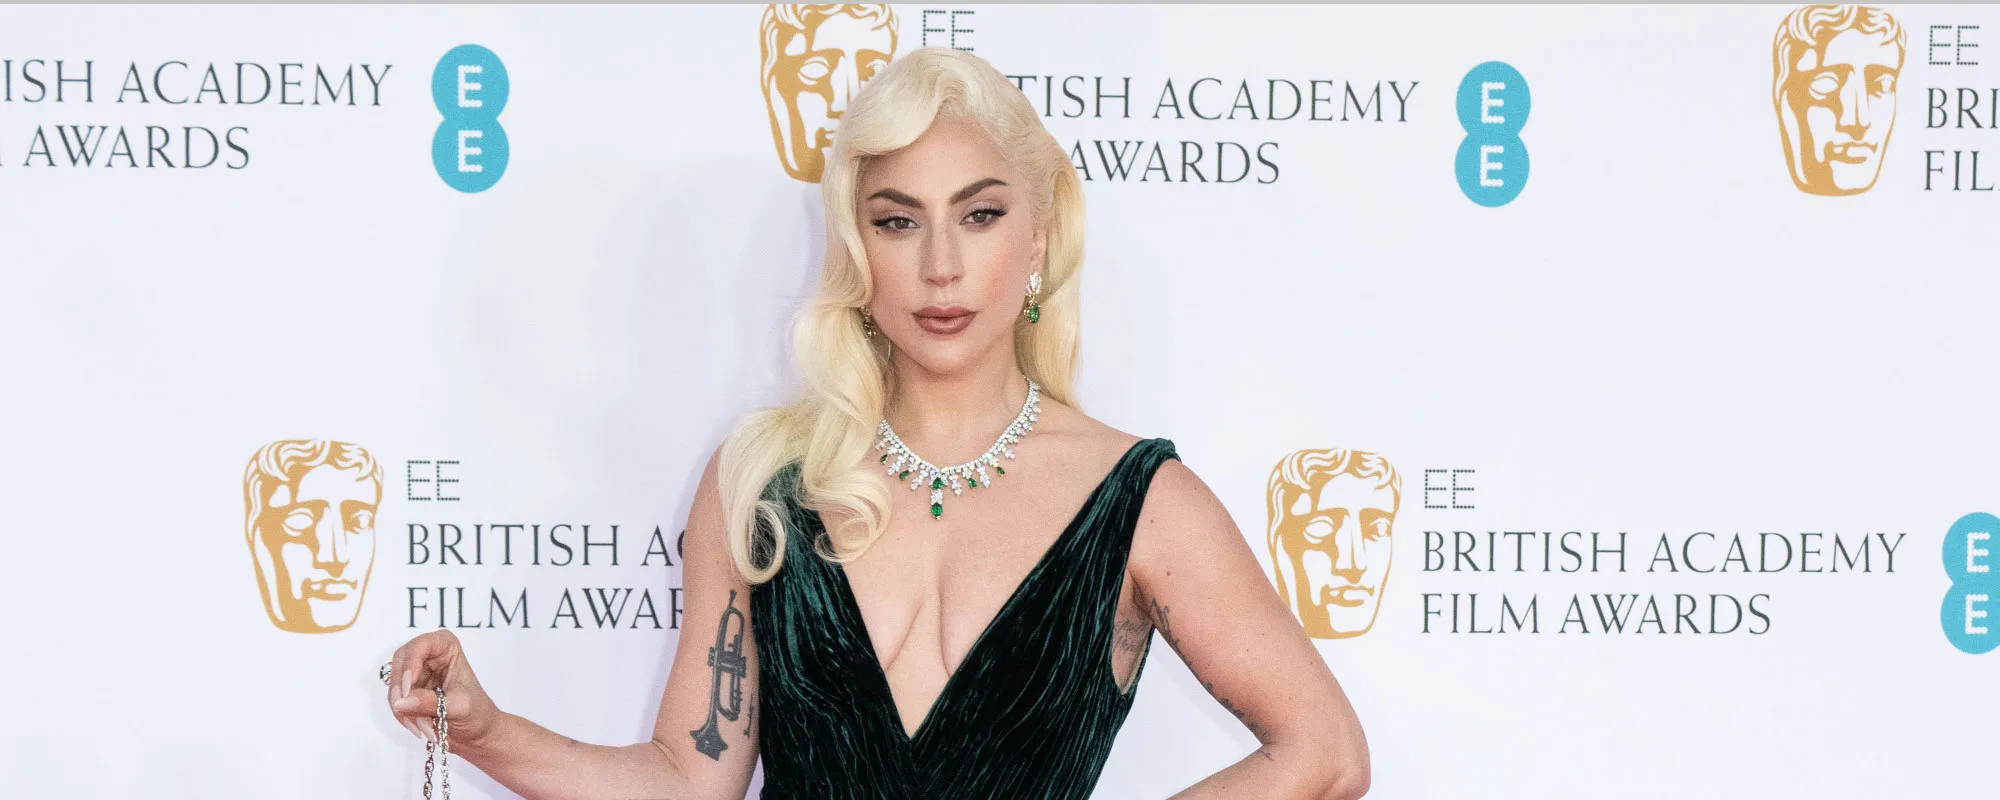 Lady Gaga’s Make-Up Brand ‘Haus Labs’ is Coming to the UK